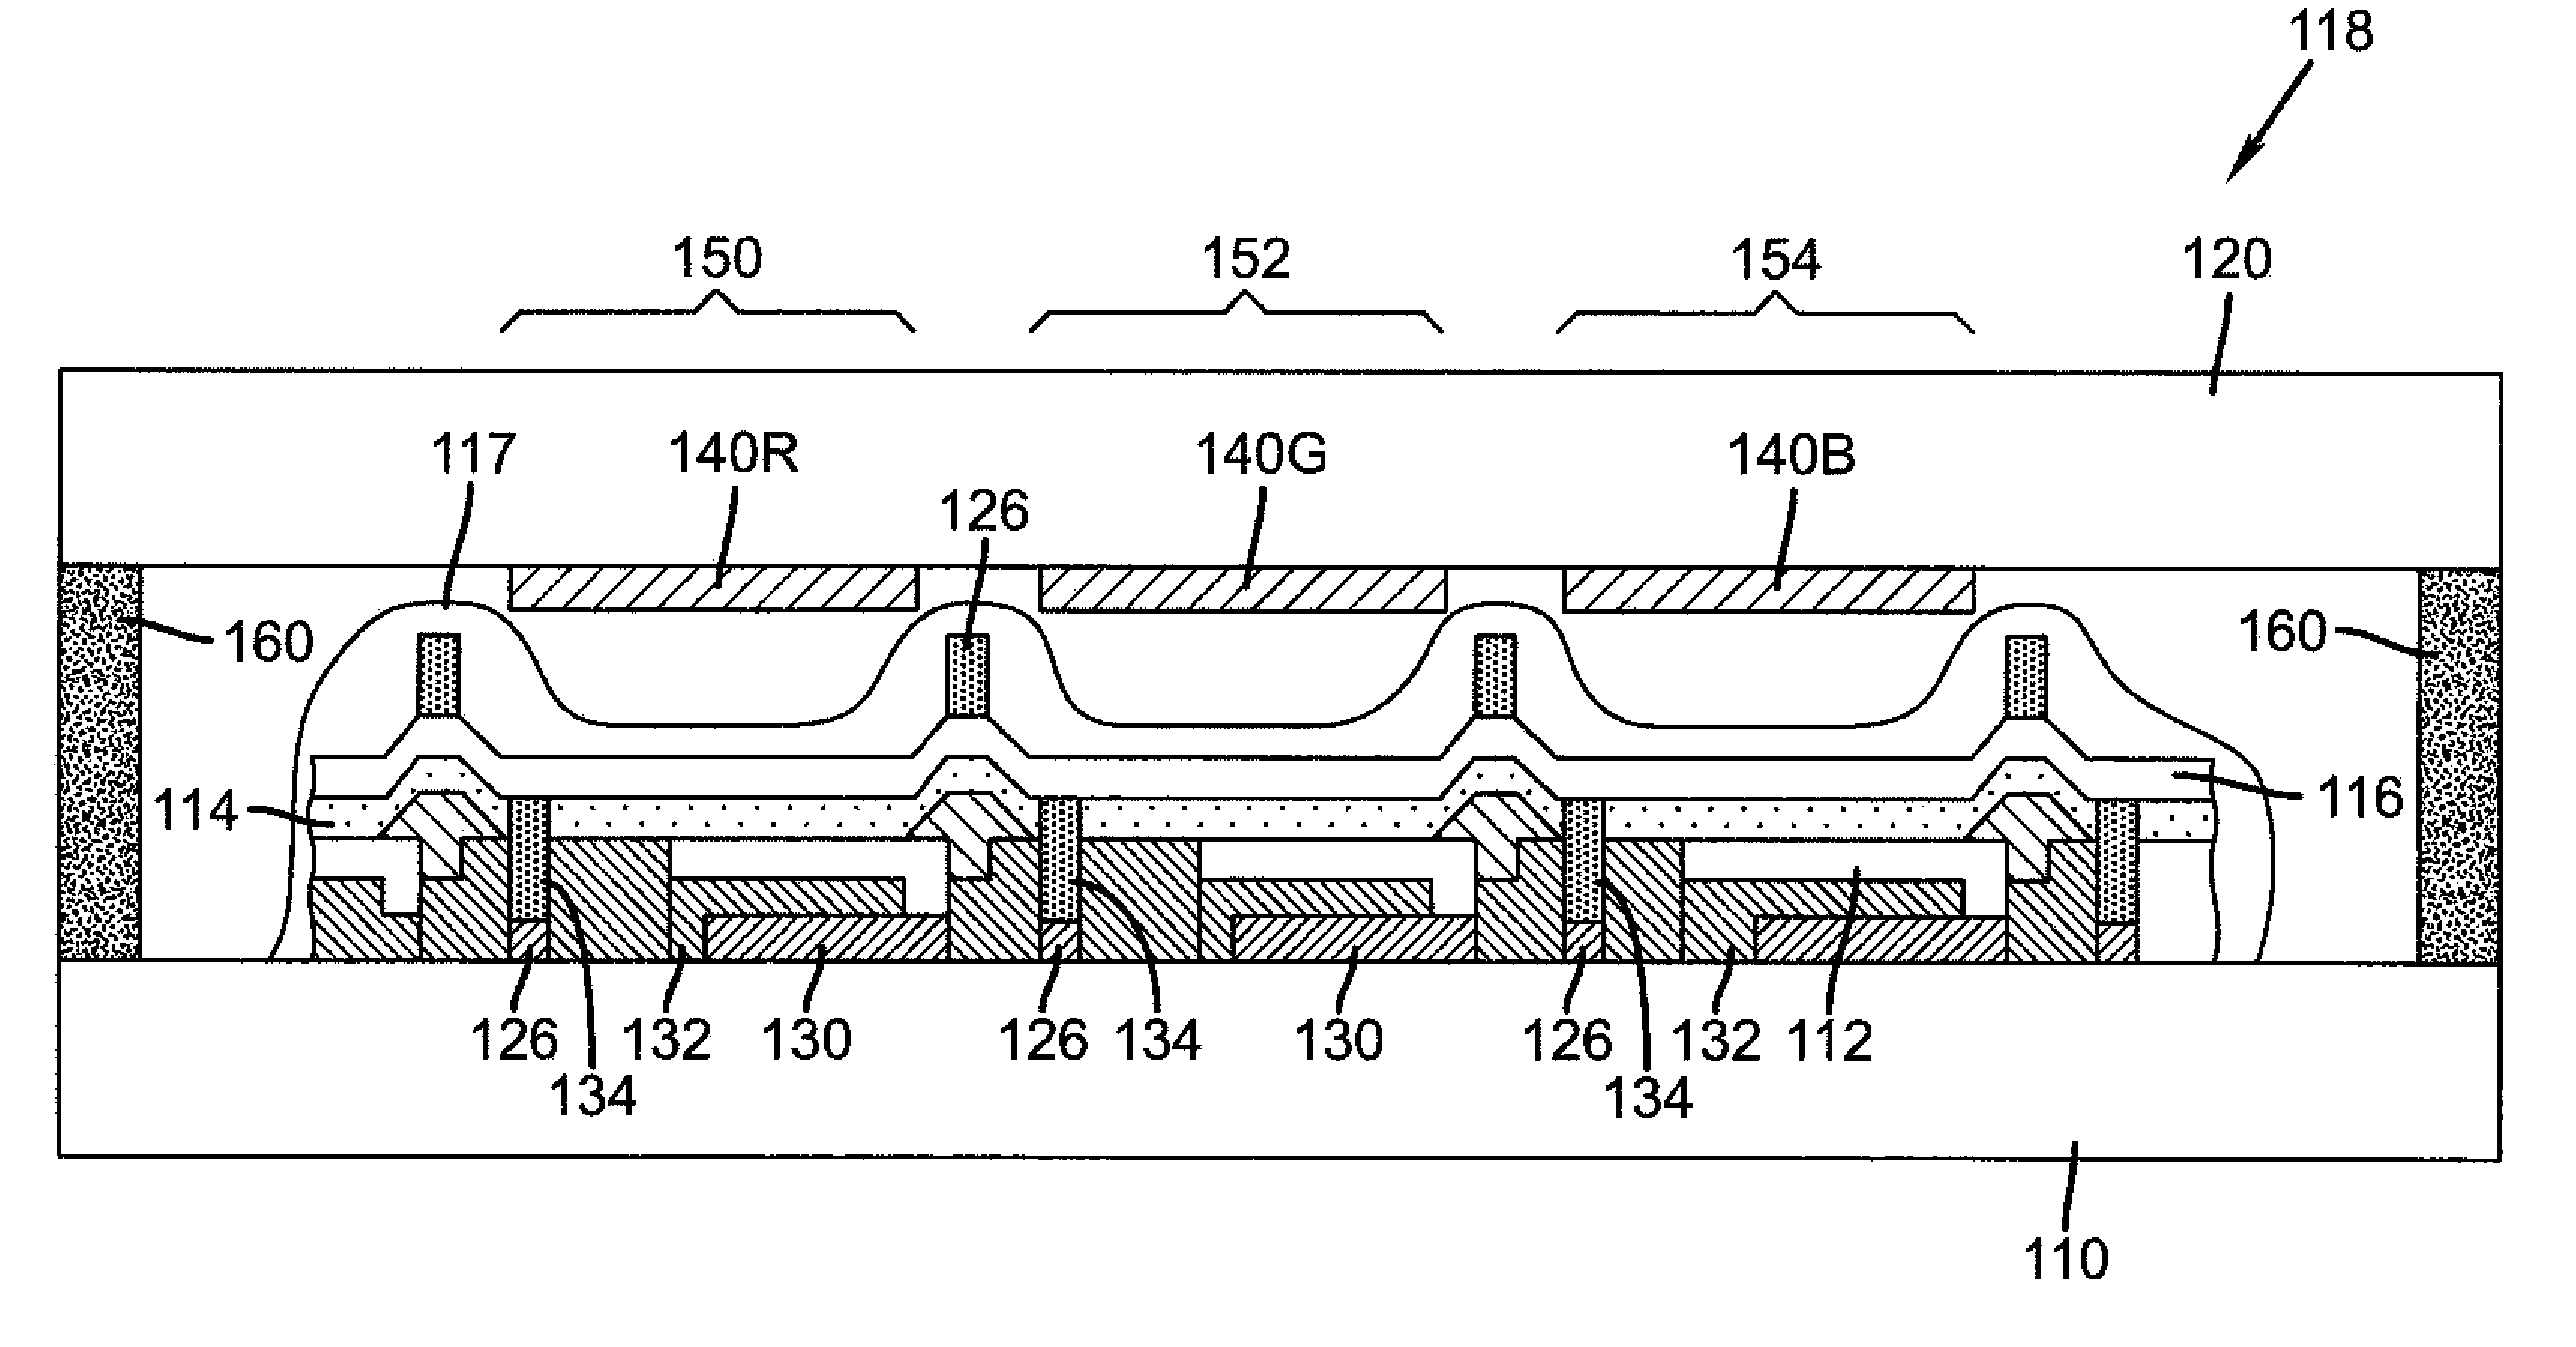 Process for forming thin film encapsulation layers